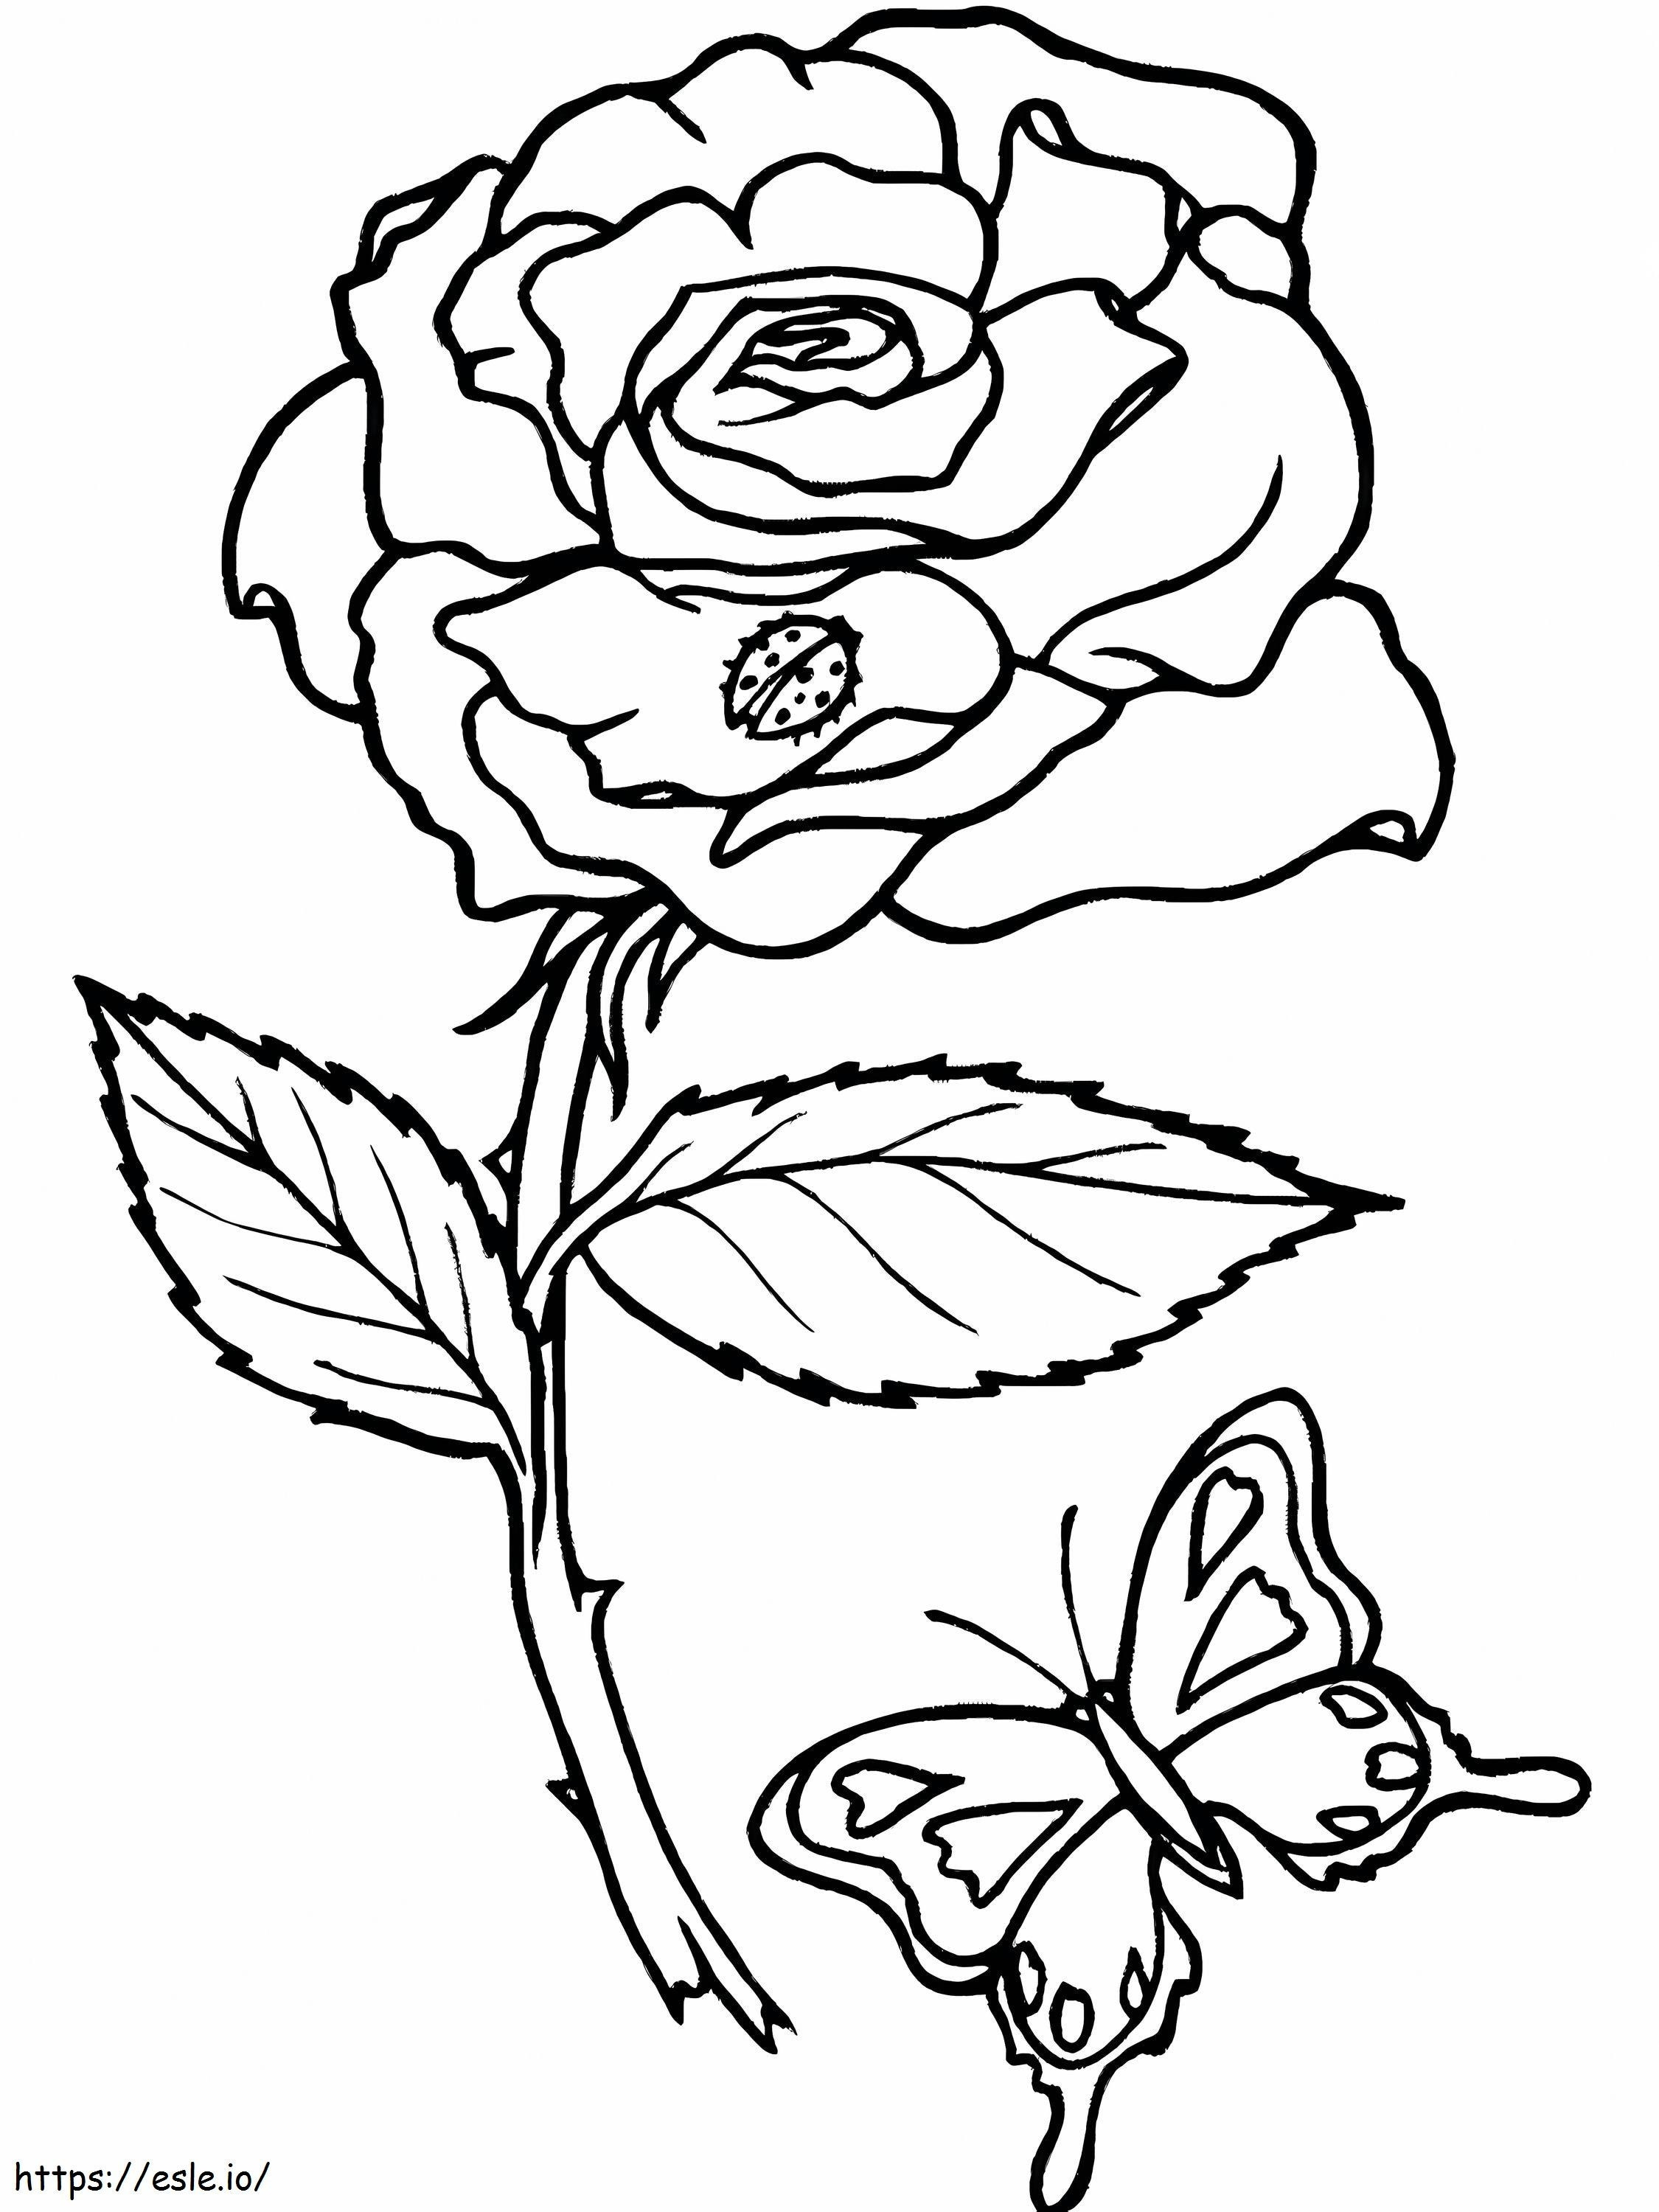 Rose And Butterfly coloring page